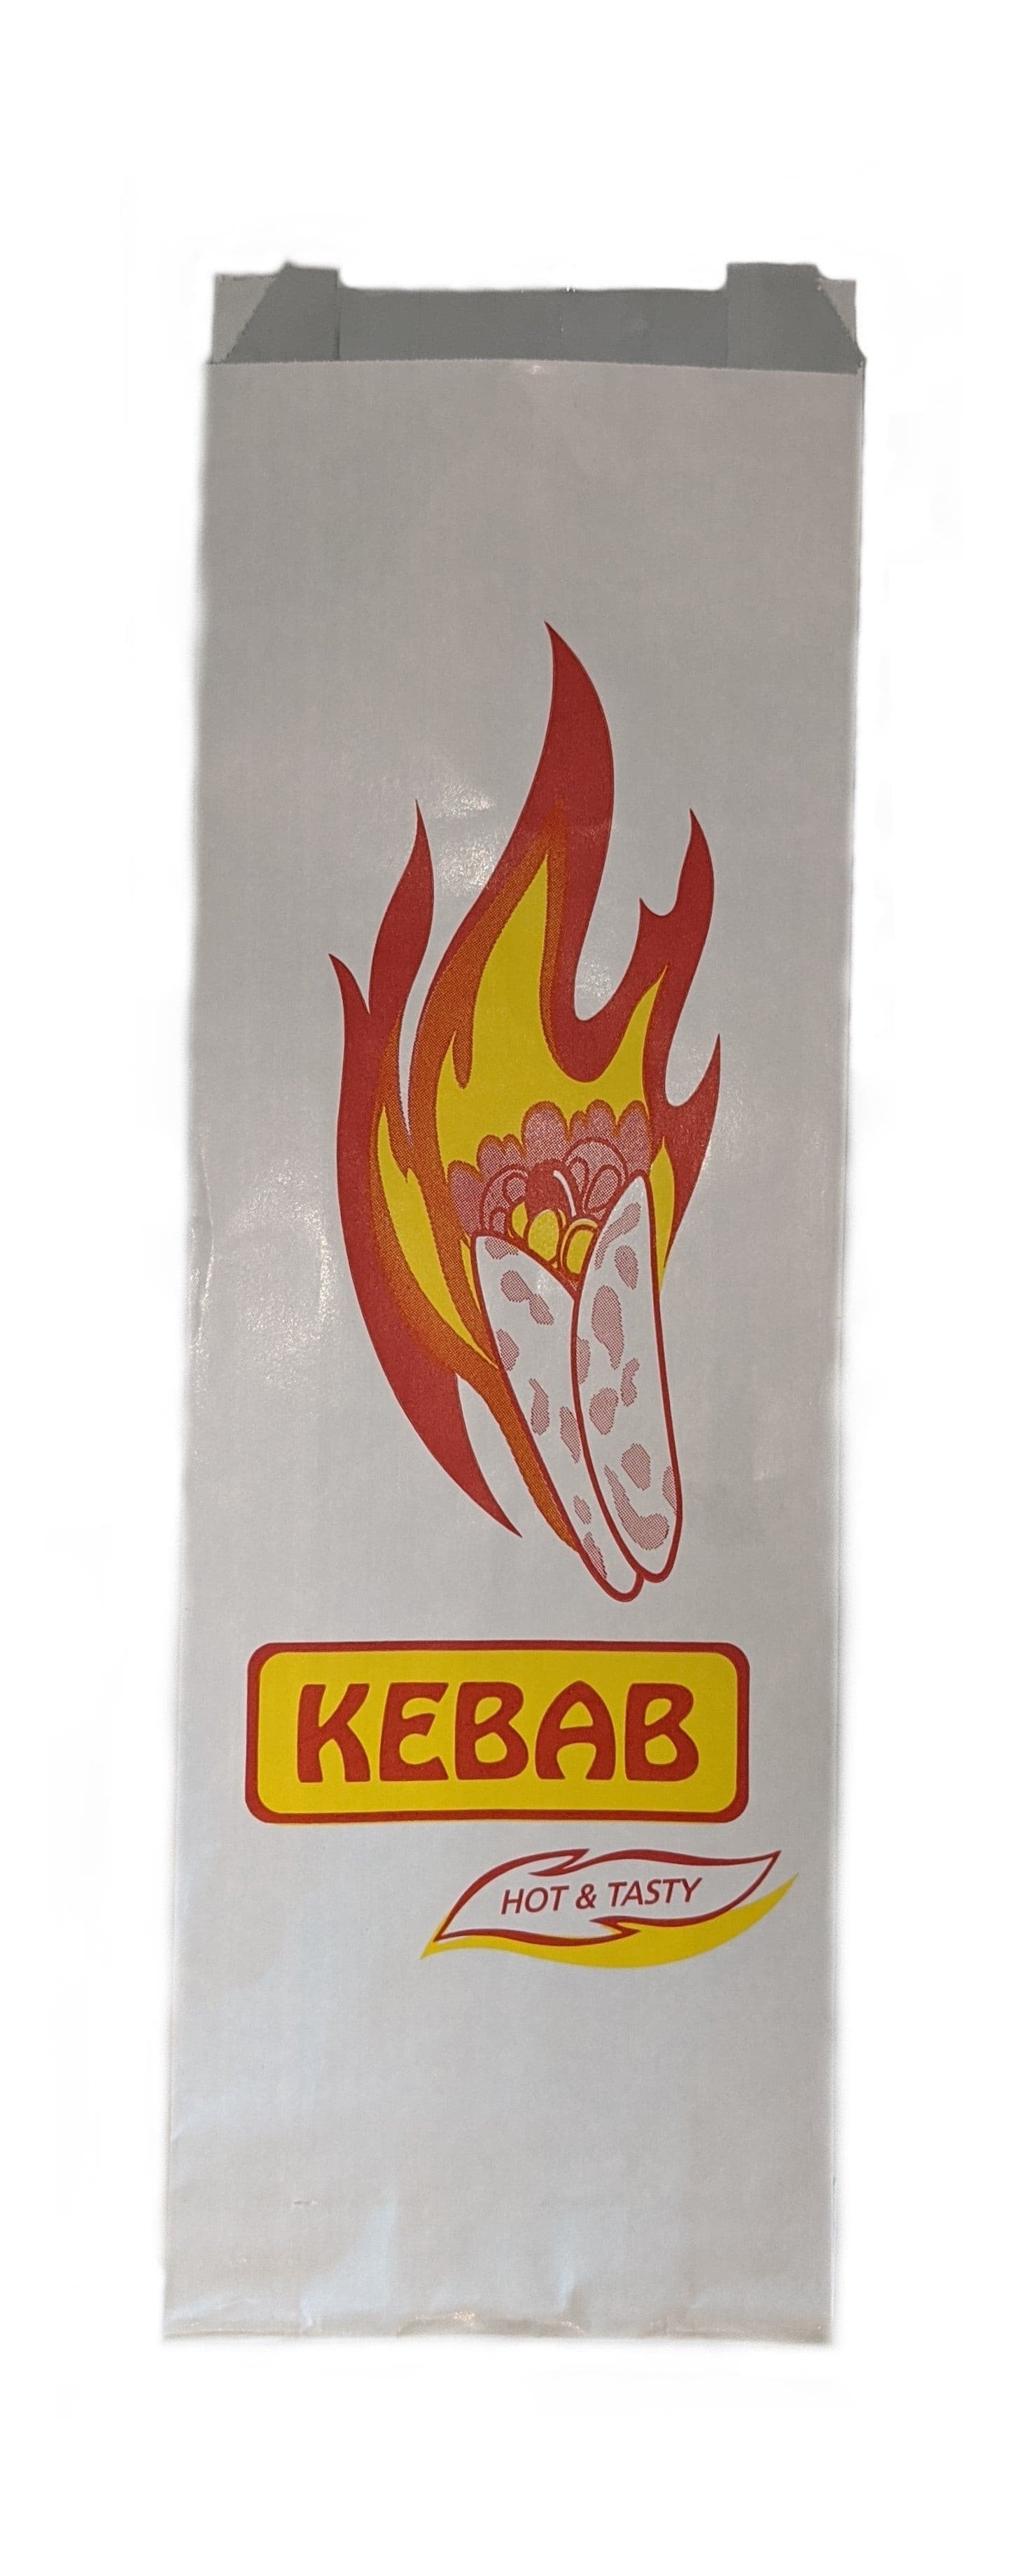 bbq printed whited paper foil lined| Alibaba.com